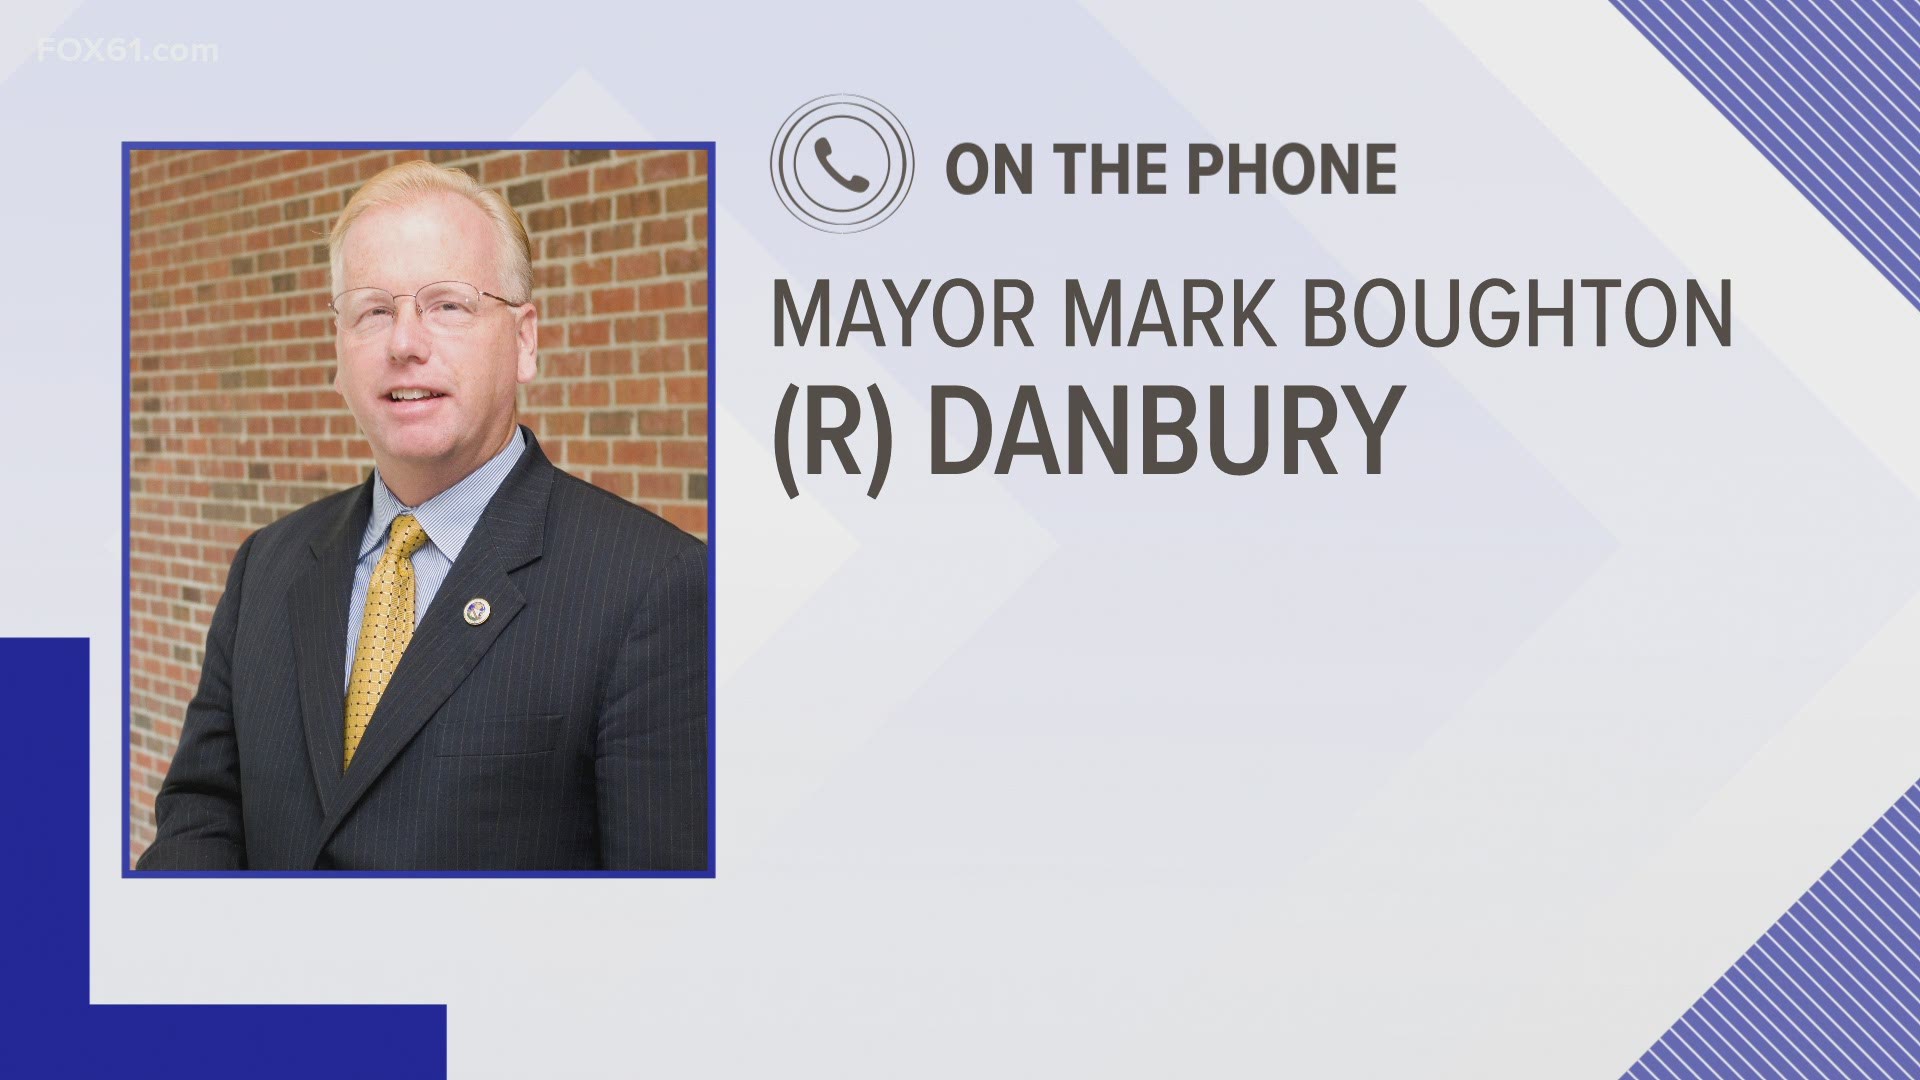 Danbury Mayor Mark Boughton confirmed Thursday that Oliver will visit the state